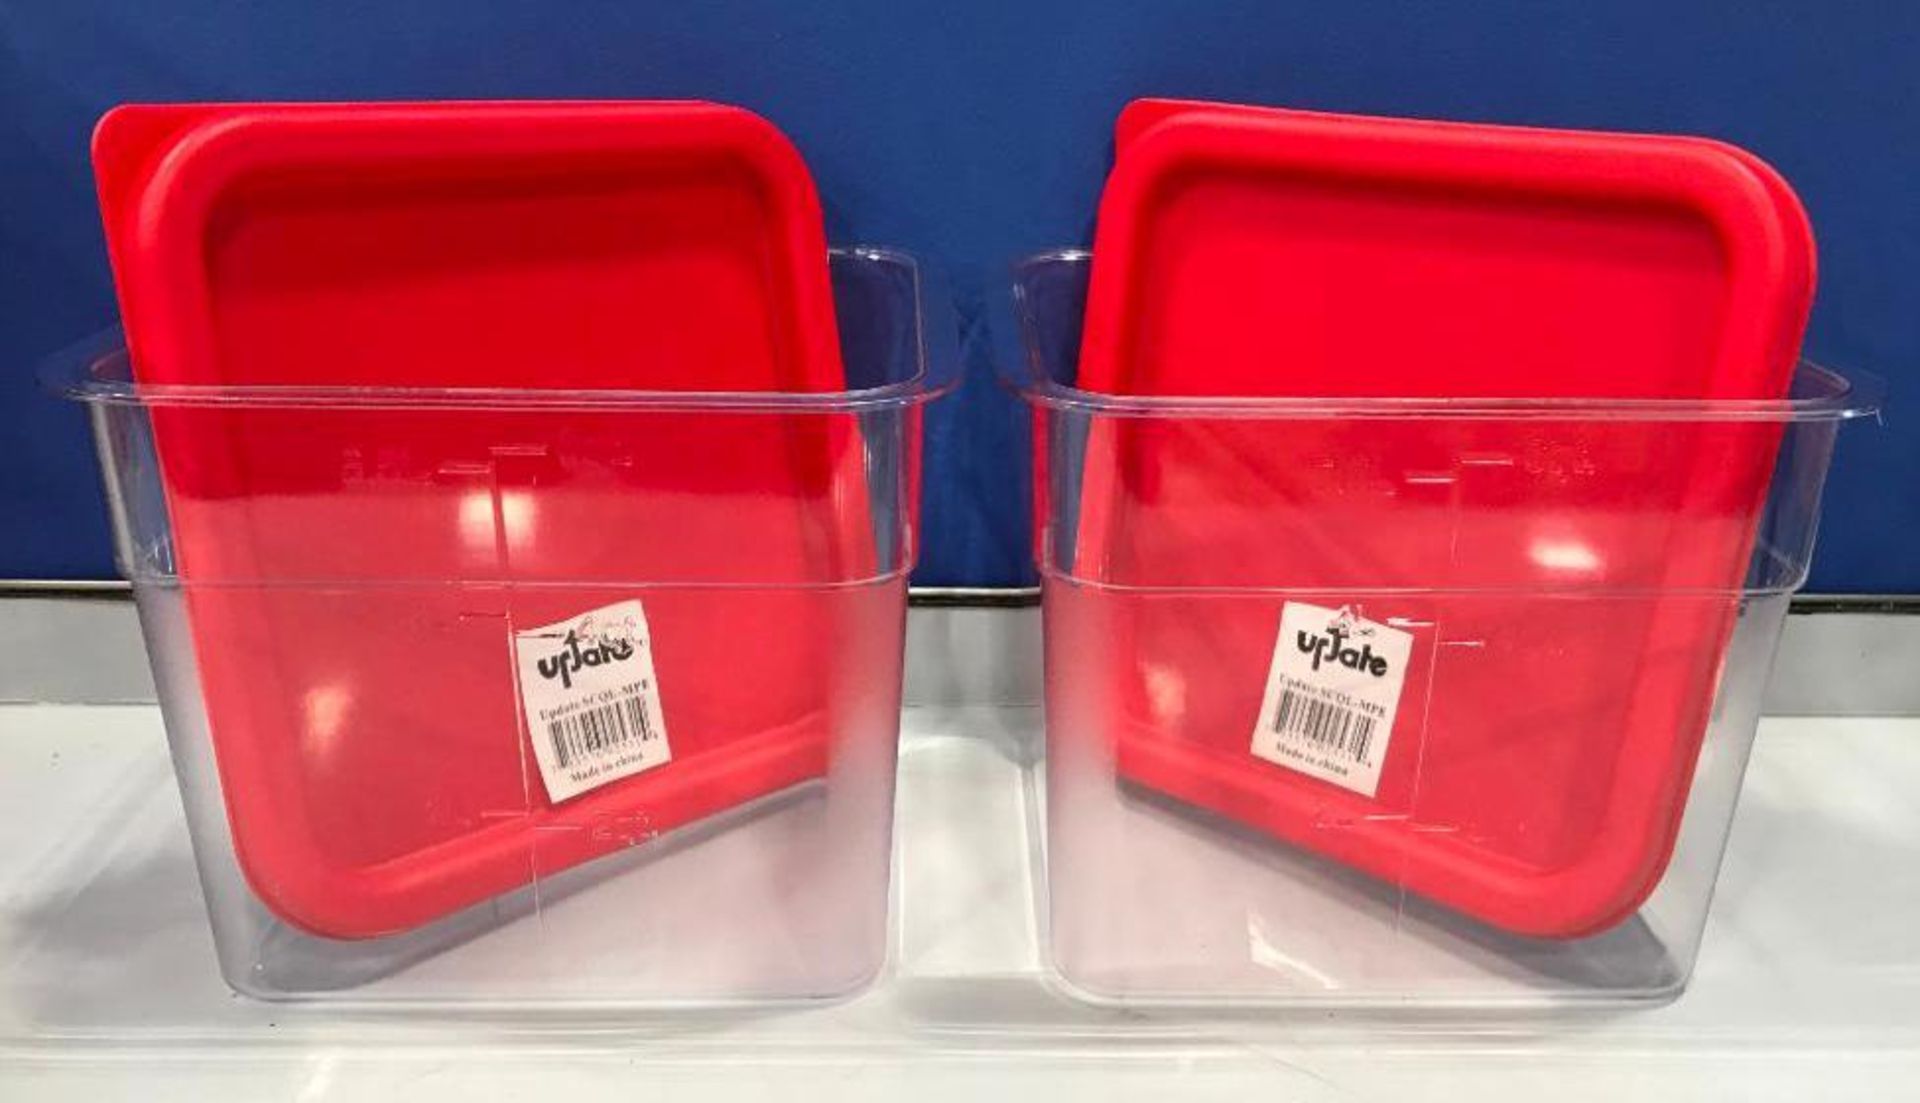 6QT SQUARE POLYCARBONATE STORAGE CONTAINER, UPDATE SCQ-6PC - LOT OF 2 - NEW - Image 2 of 3